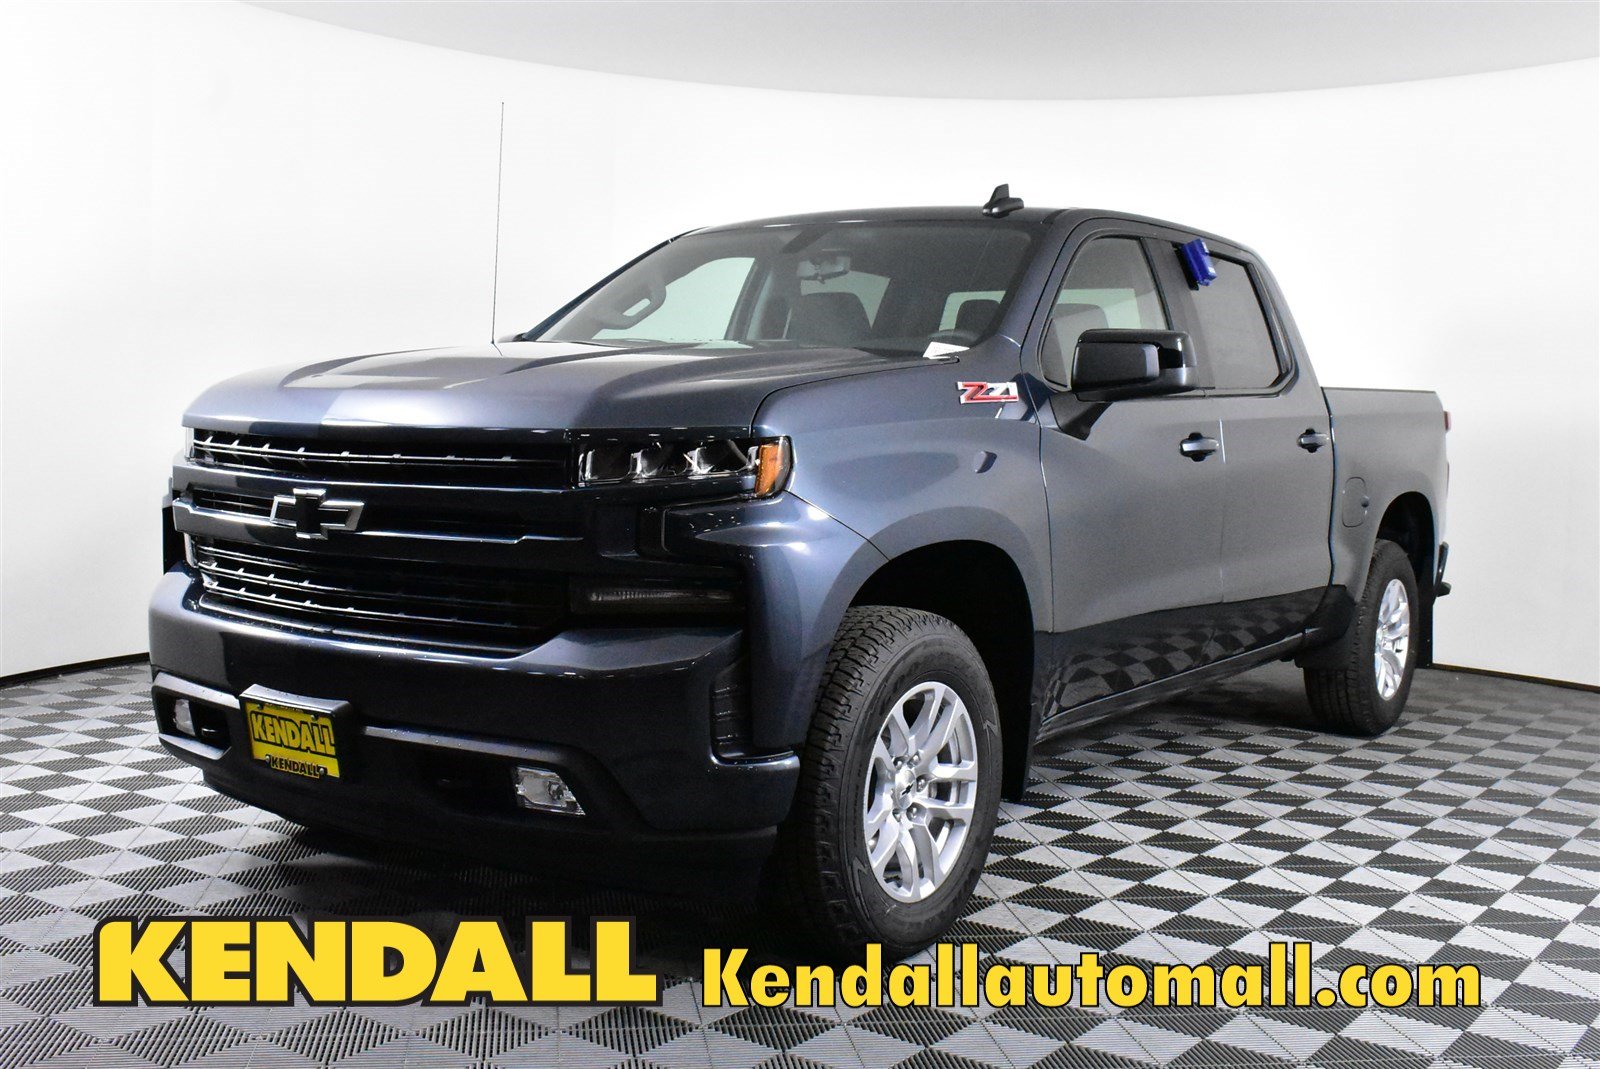 New 2019 Chevrolet Silverado 1500 Rst 4wd In Nampa D190061 Kendall